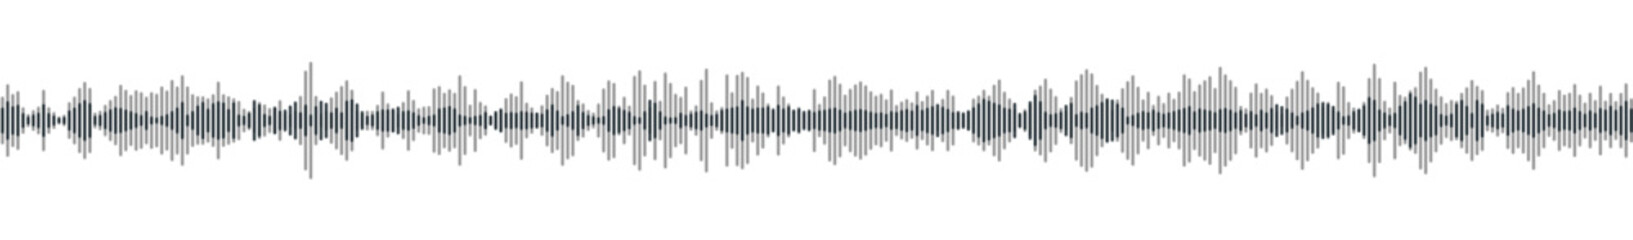 seamless sound waveform pattern for radio podcasts, music player, video editor, voise message in soc